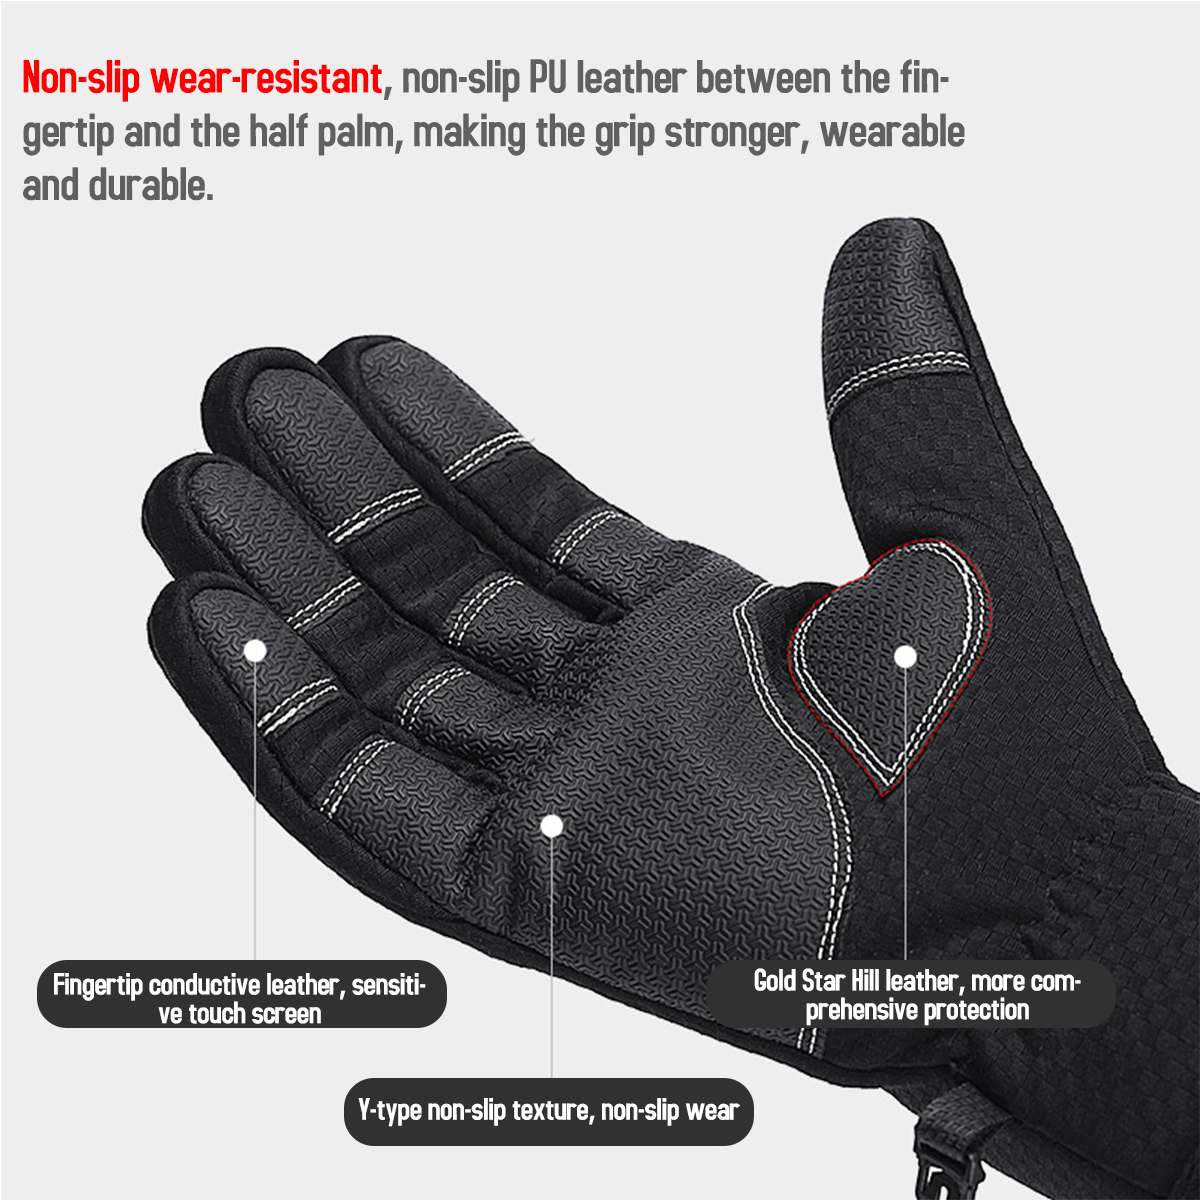 Windstopers-Skiing-Gloves-Anti-Slip-Touchscreen-Breathable-Water-Repellent-Zipper-Warm-Glove-1580293-3